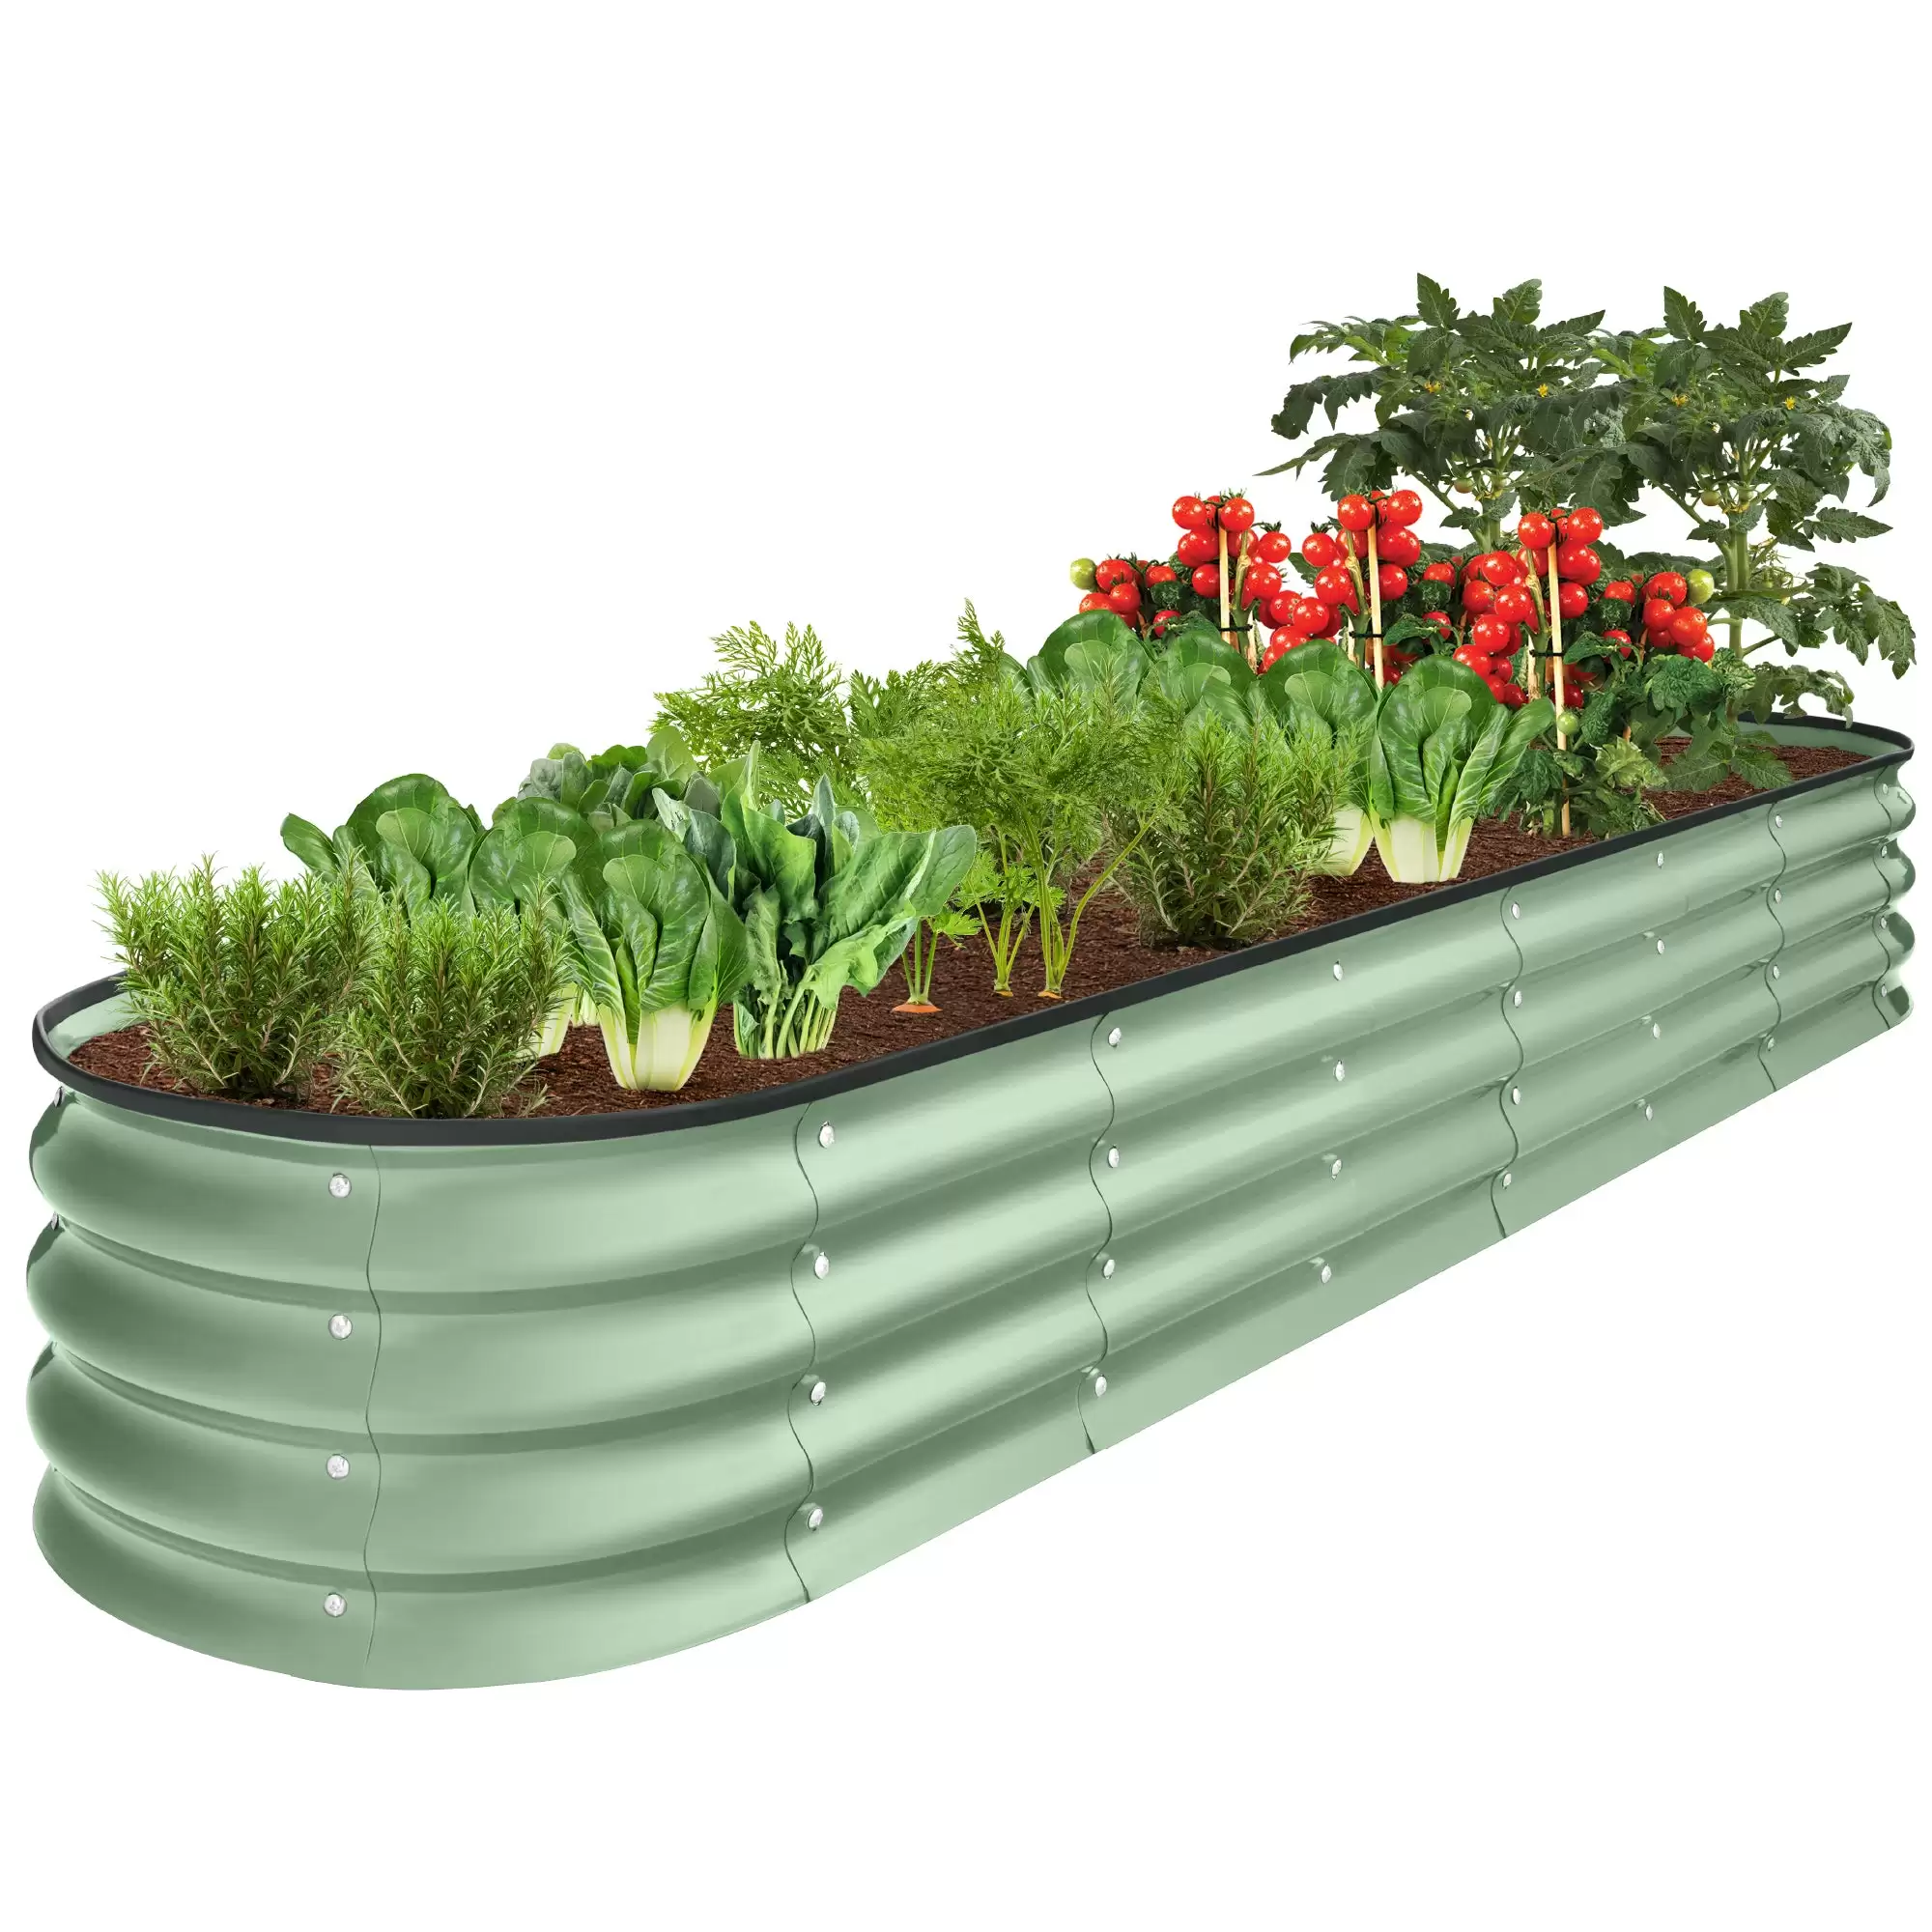 Order In Just $59.99 Outdoor Metal Raised Oval Garden Bed For Vegetables, Flowers With This Bestchoiceproducts Discount Voucher